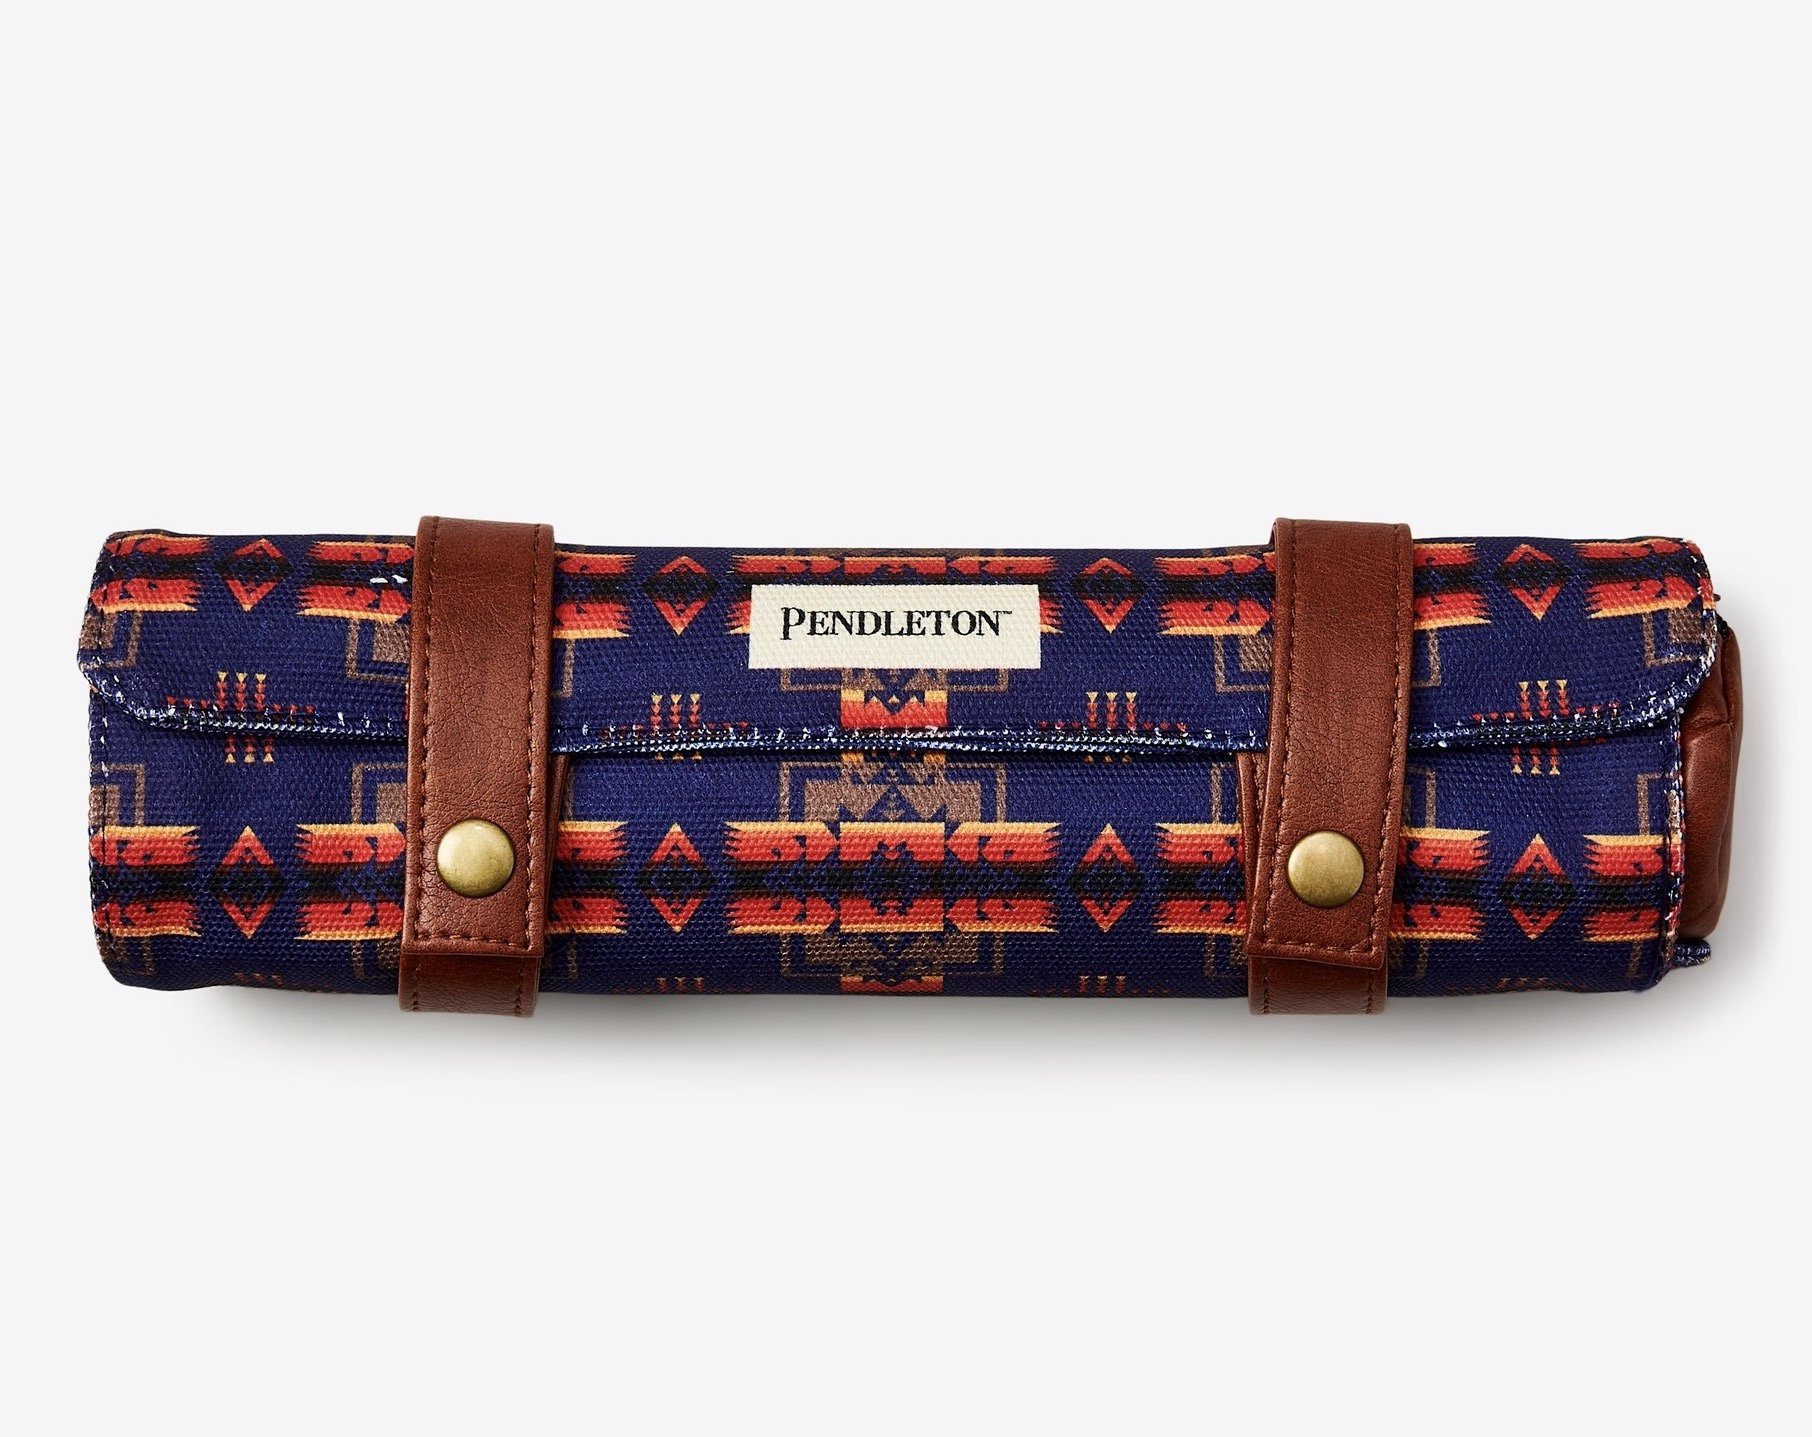 Pendleton Travel Chess & Checkers Roll Up